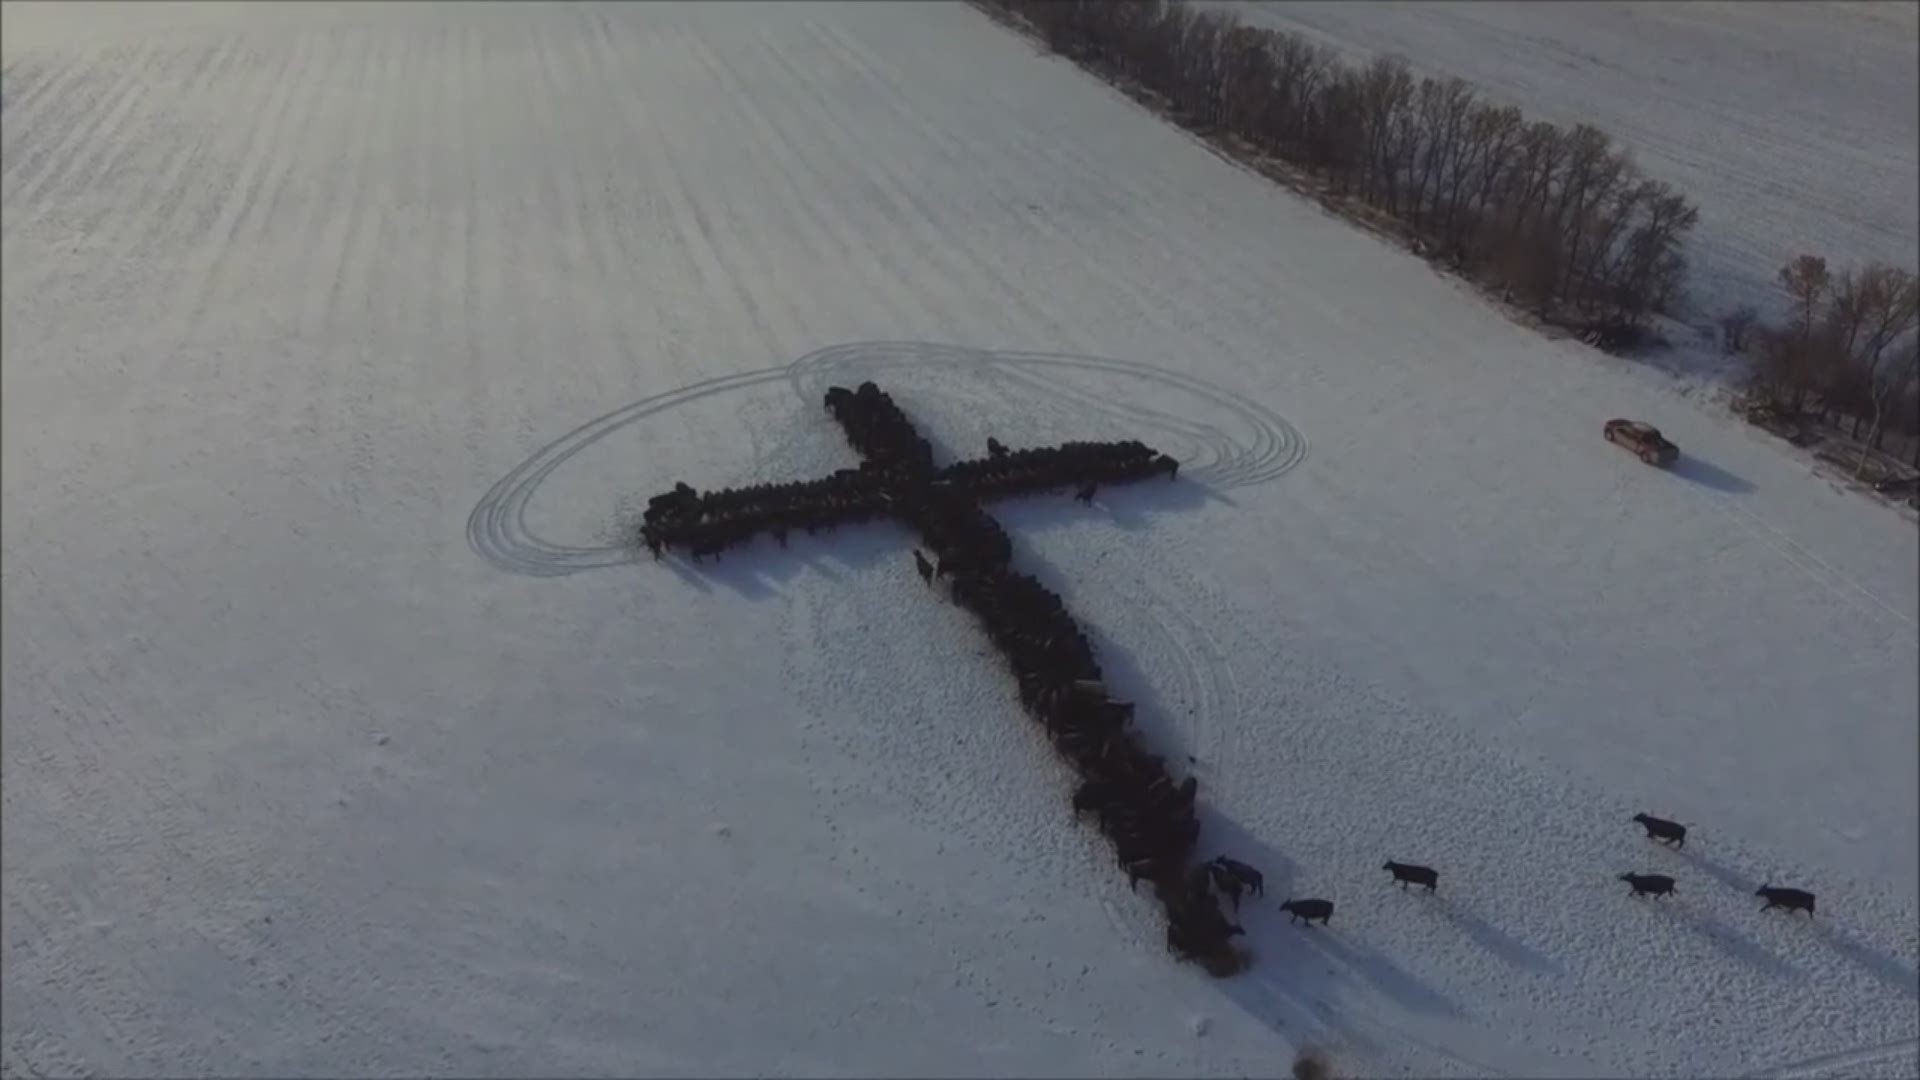 Laura Duchsherer and her family worked to corral some cattle into the shape of a cross on Christmas Day at their North Dakota farm. (Credit: Laura Duchsherer)